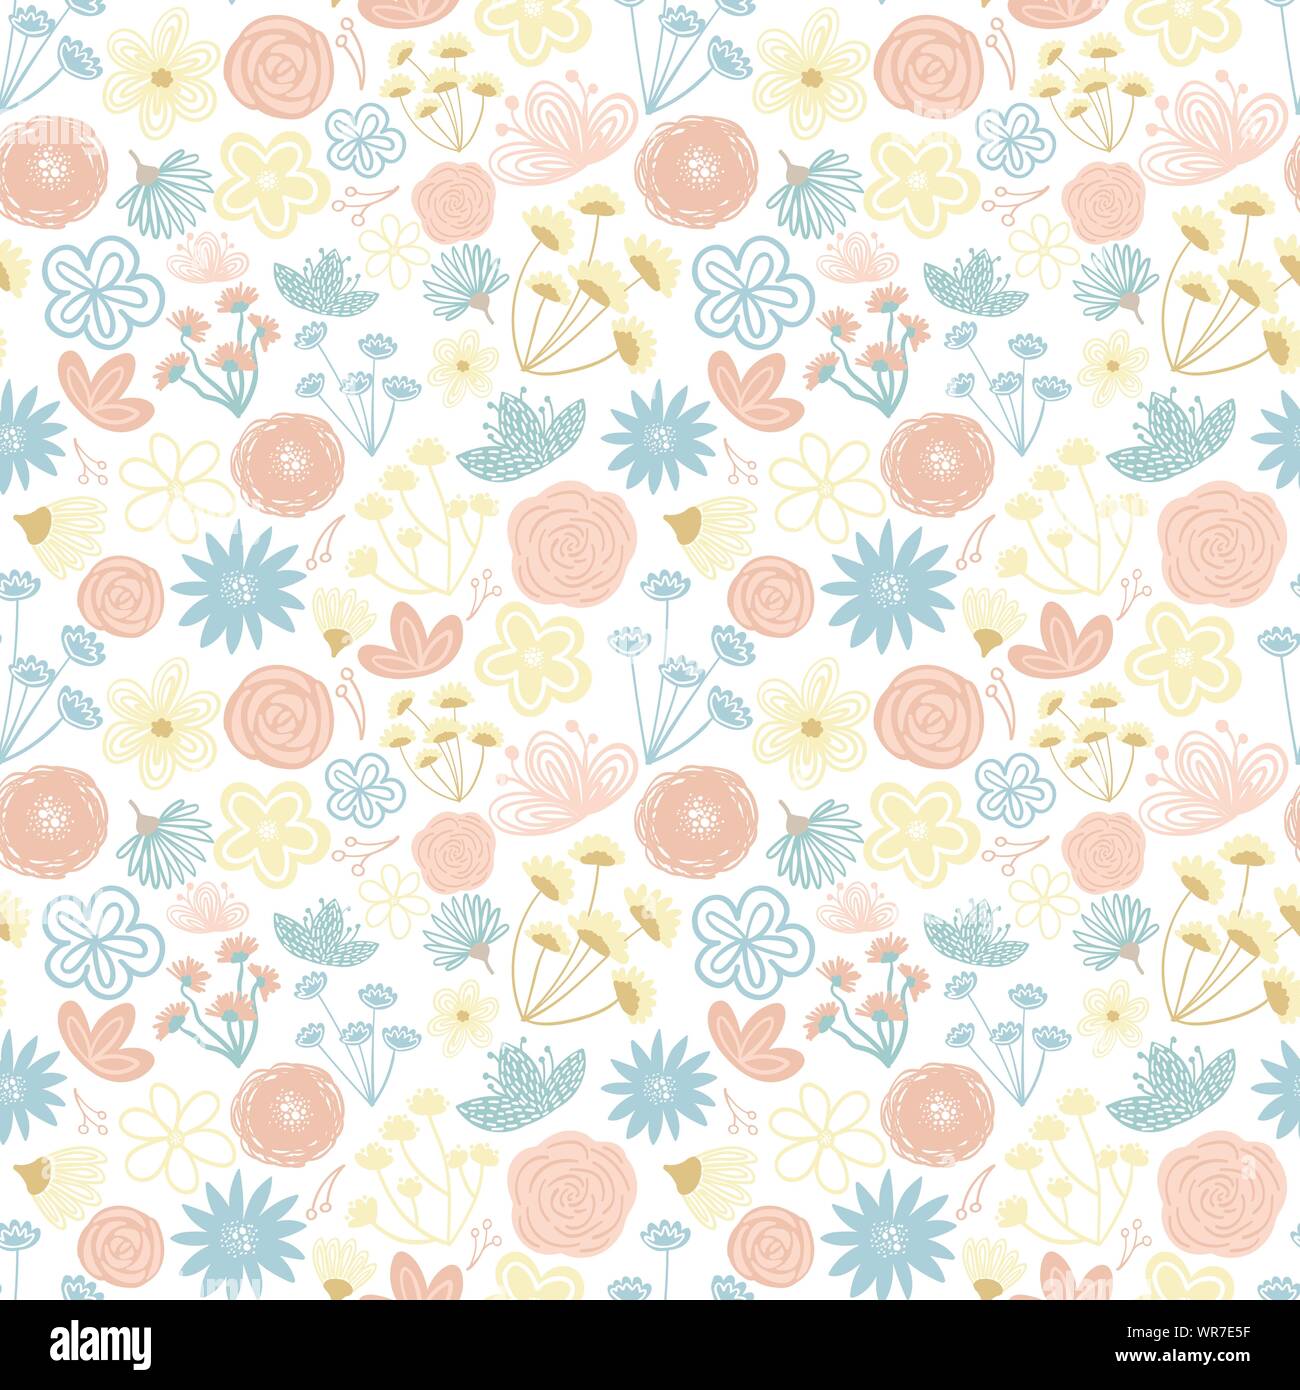 Seamless pattern of cartoon hand-drawn multicolored flowers. Illustration in pastel shades for clothes, wrappers, gifts, textiles, postcards and invit Stock Vector